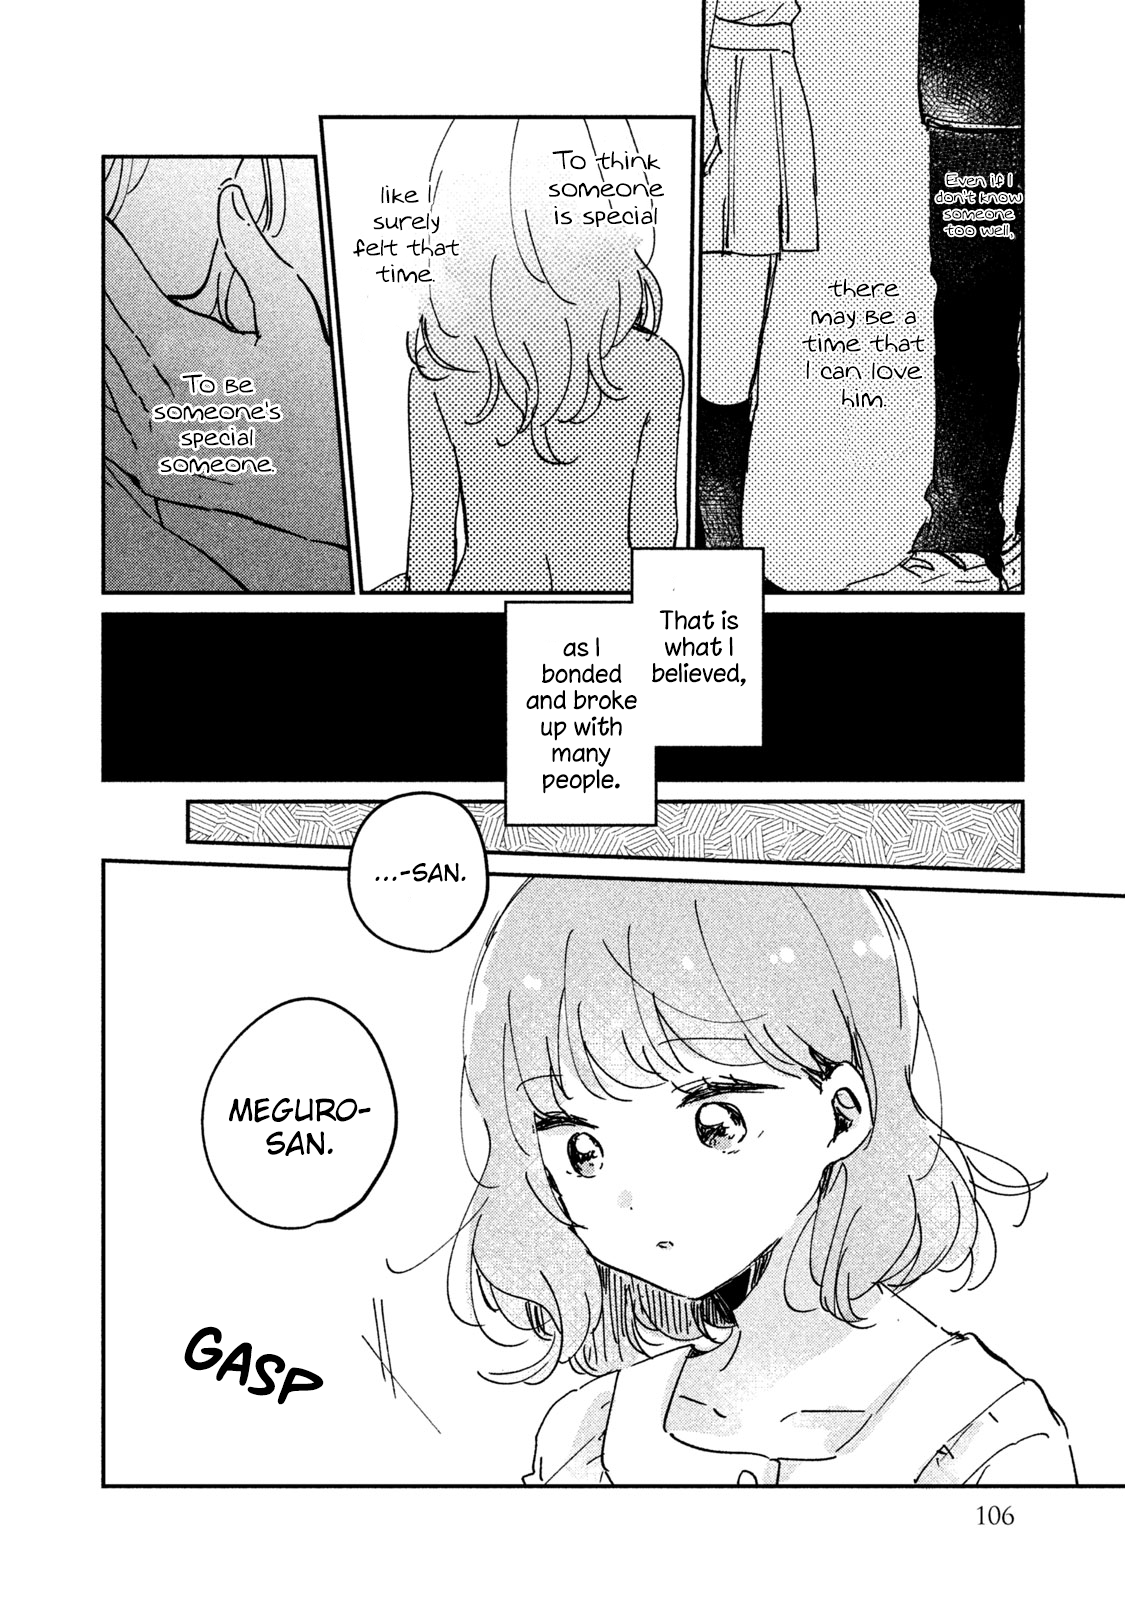 It's Not Meguro-san's First Time chapter 16.5 page 15